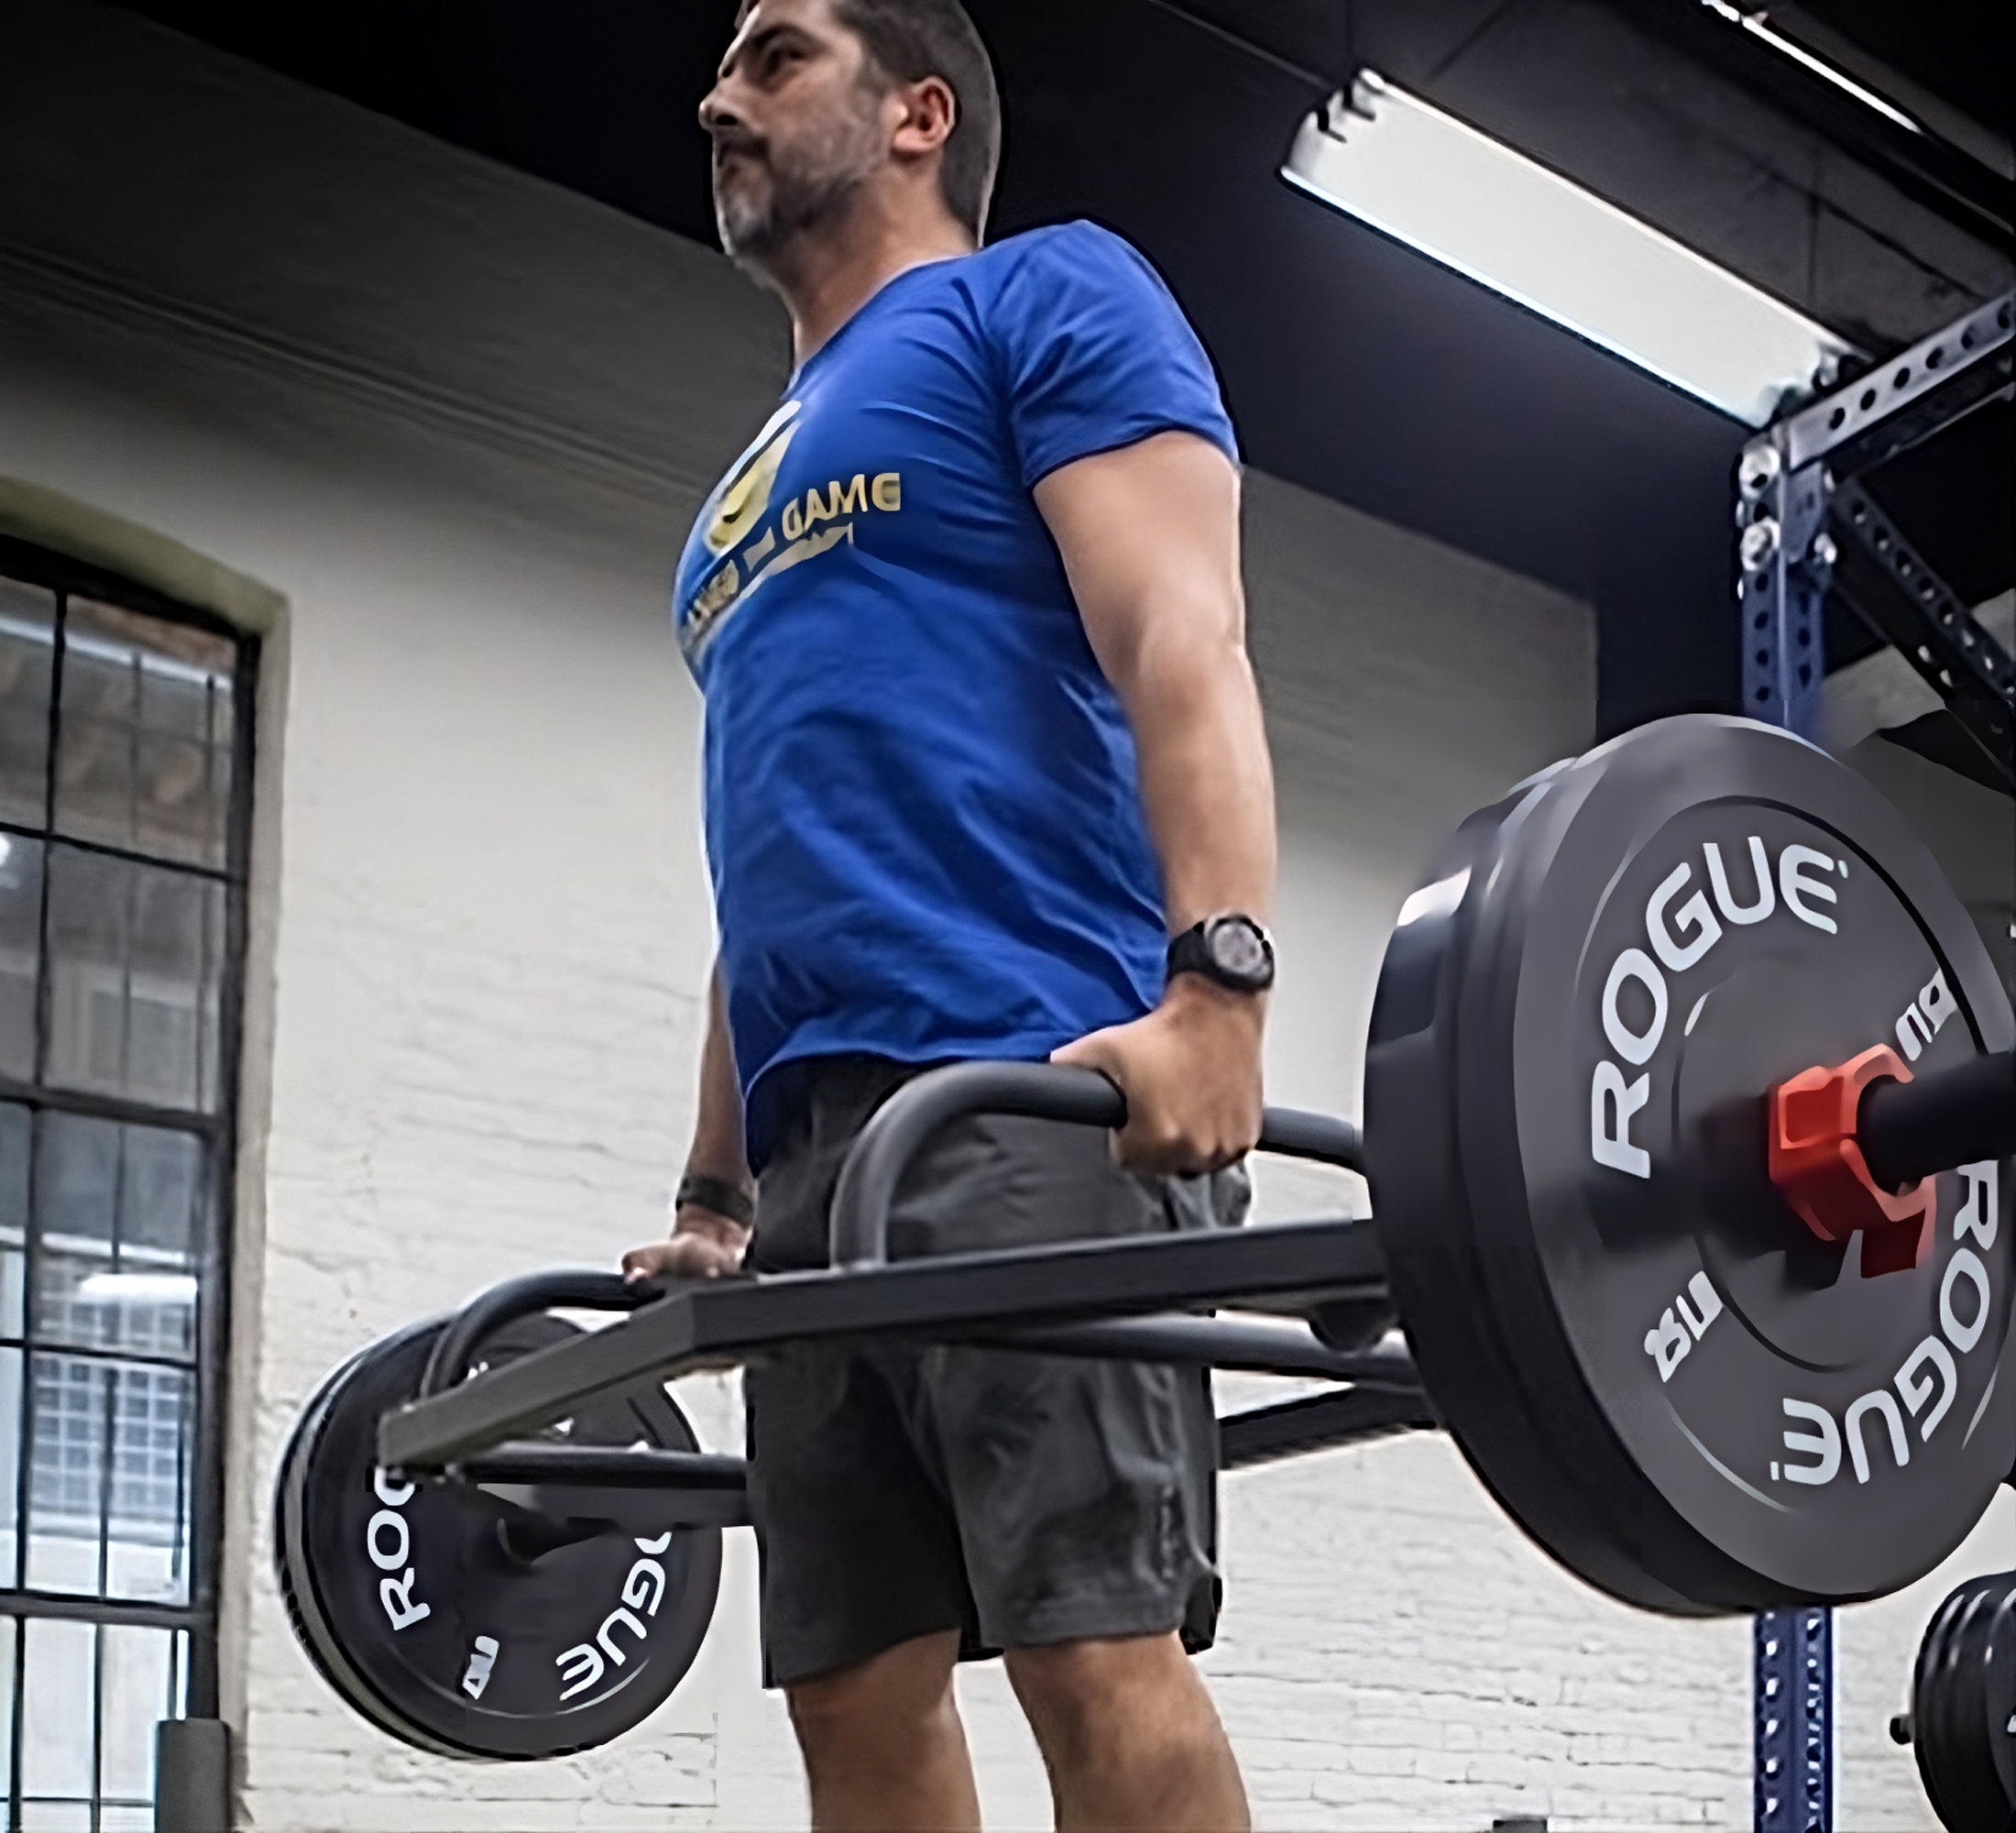 A man lifting a barbell in a gym.